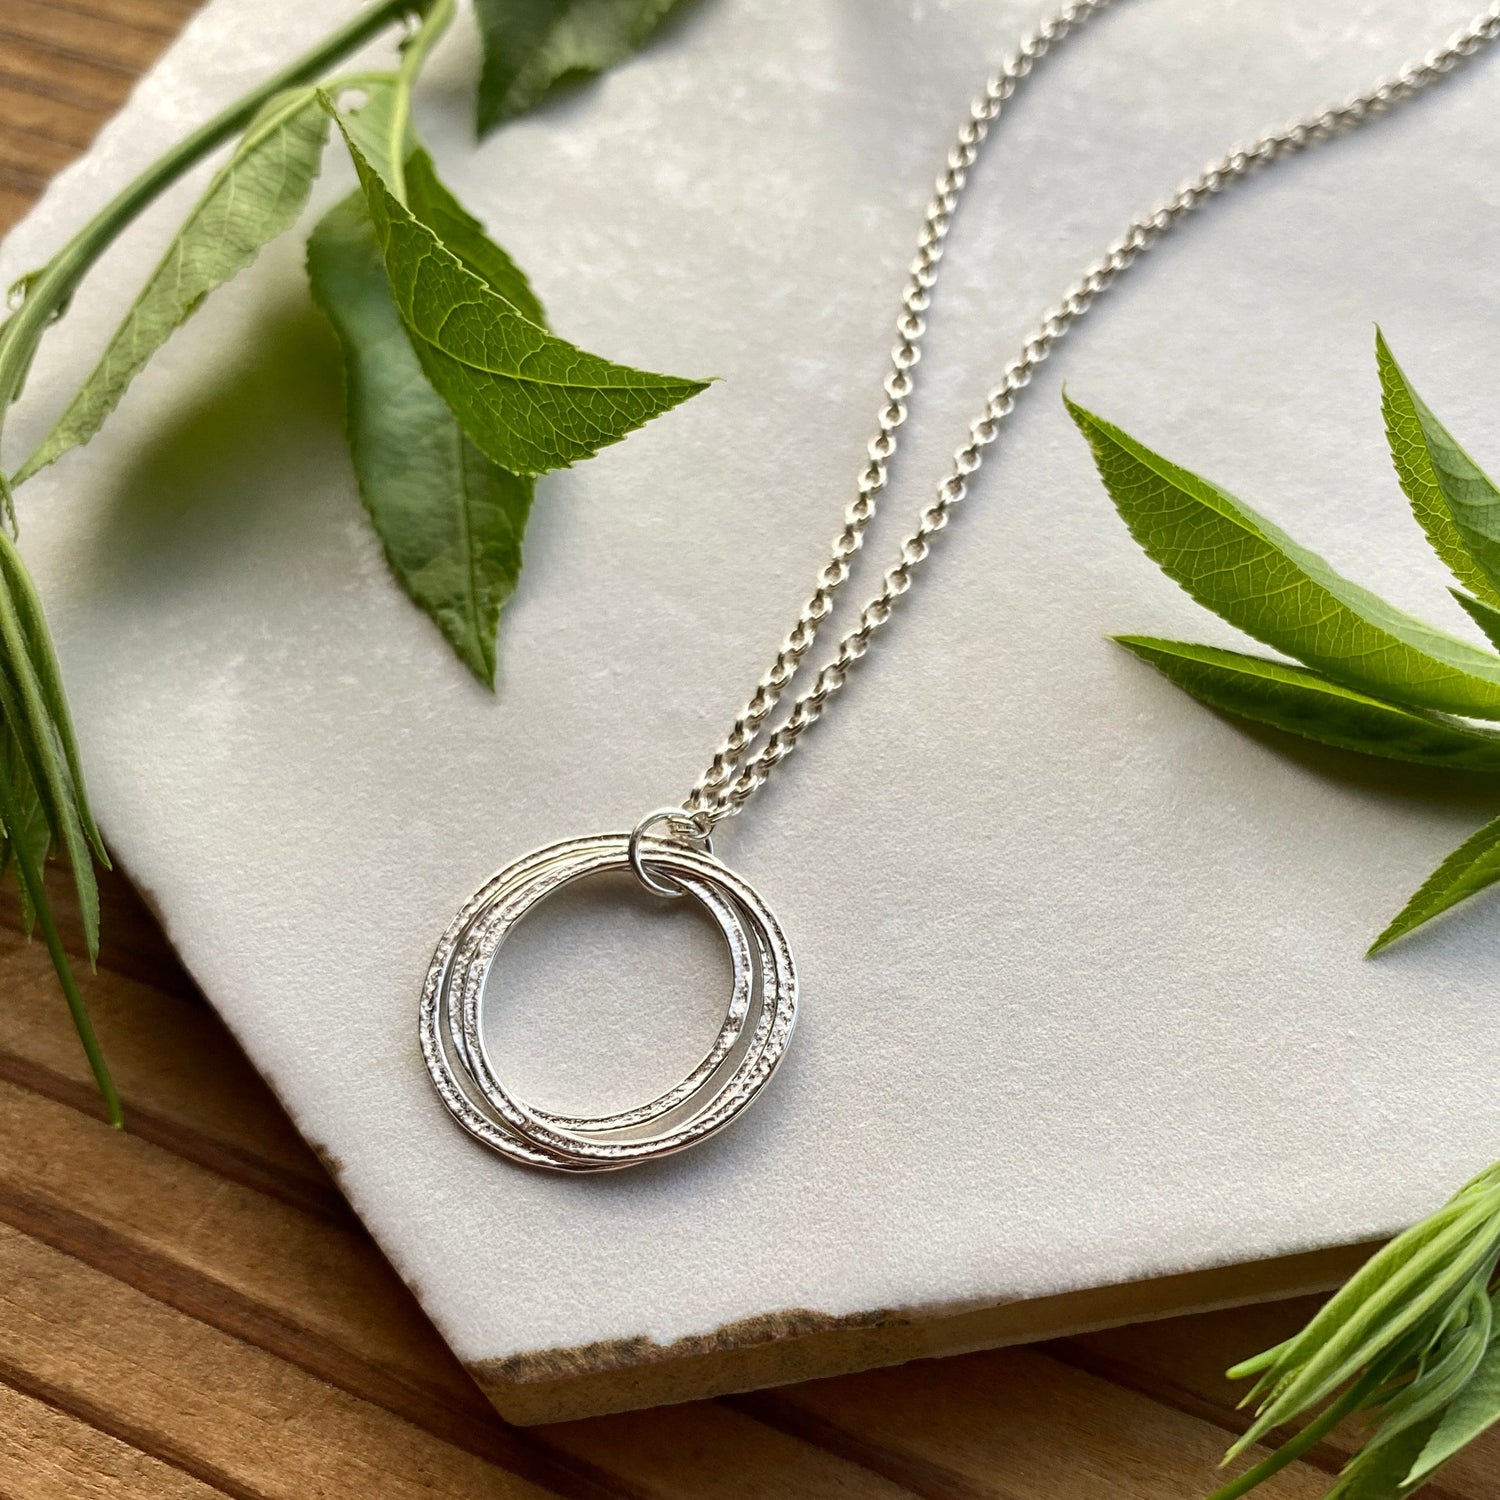 30th Milestone Birthday Necklace, Mid Size Sterling Silver 3 Rings for 3 Decades, Perfectly Imperfect Sparkly Circles Pendant